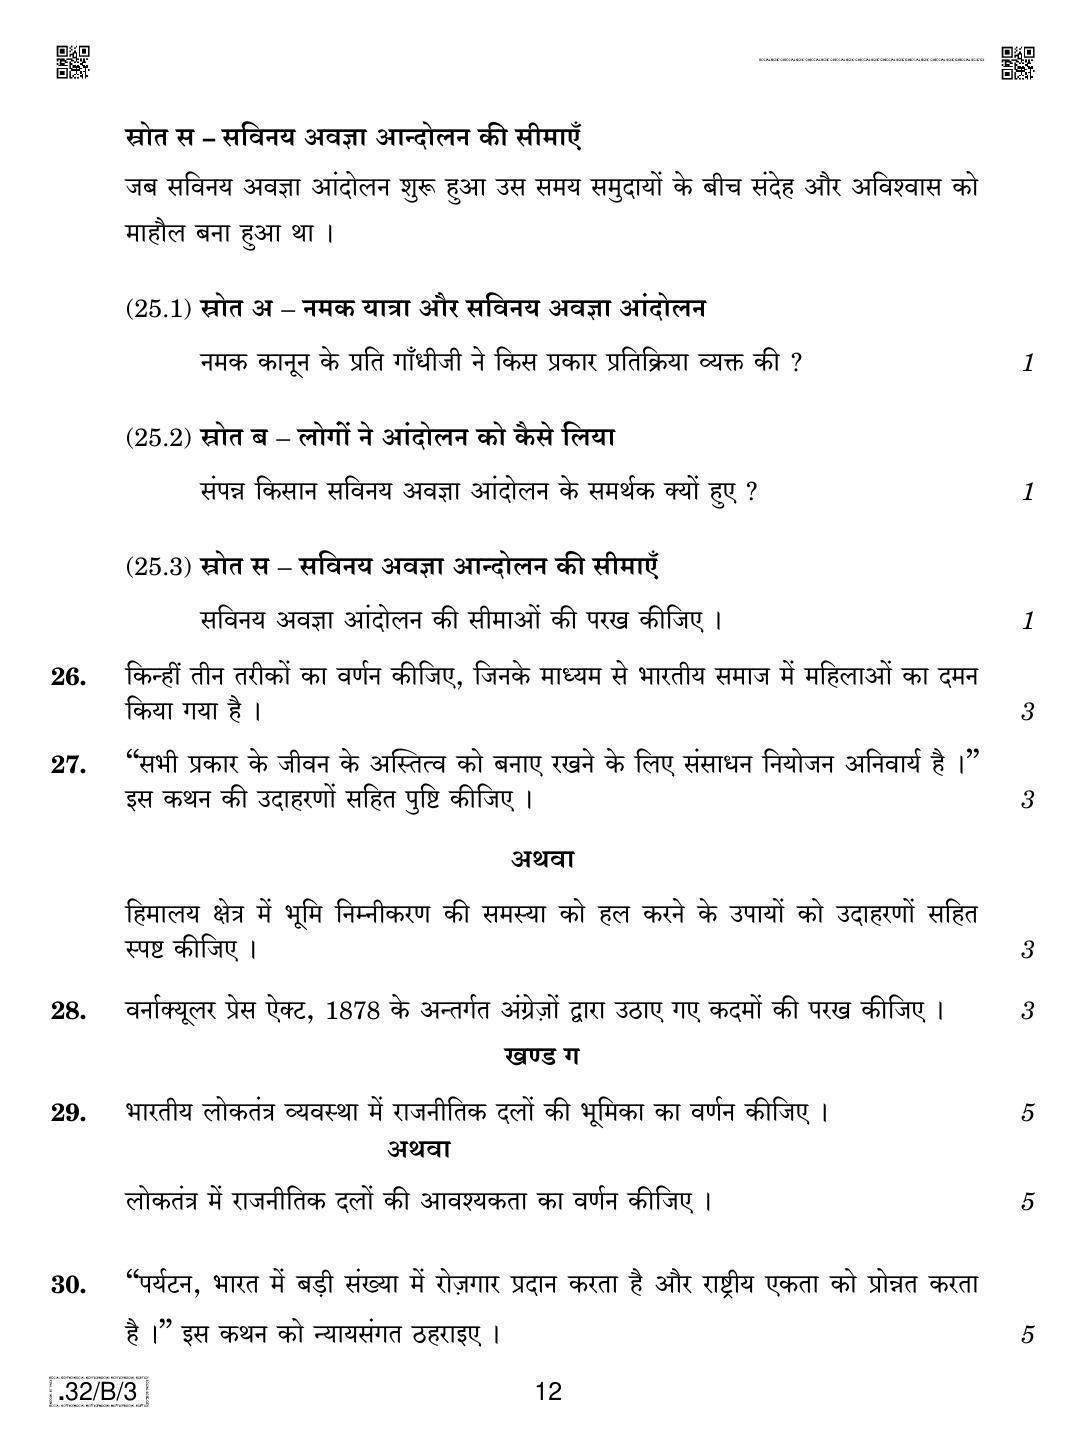 CBSE Class 10 32-C-3 Social Science 2020 Compartment Question Paper - Page 12